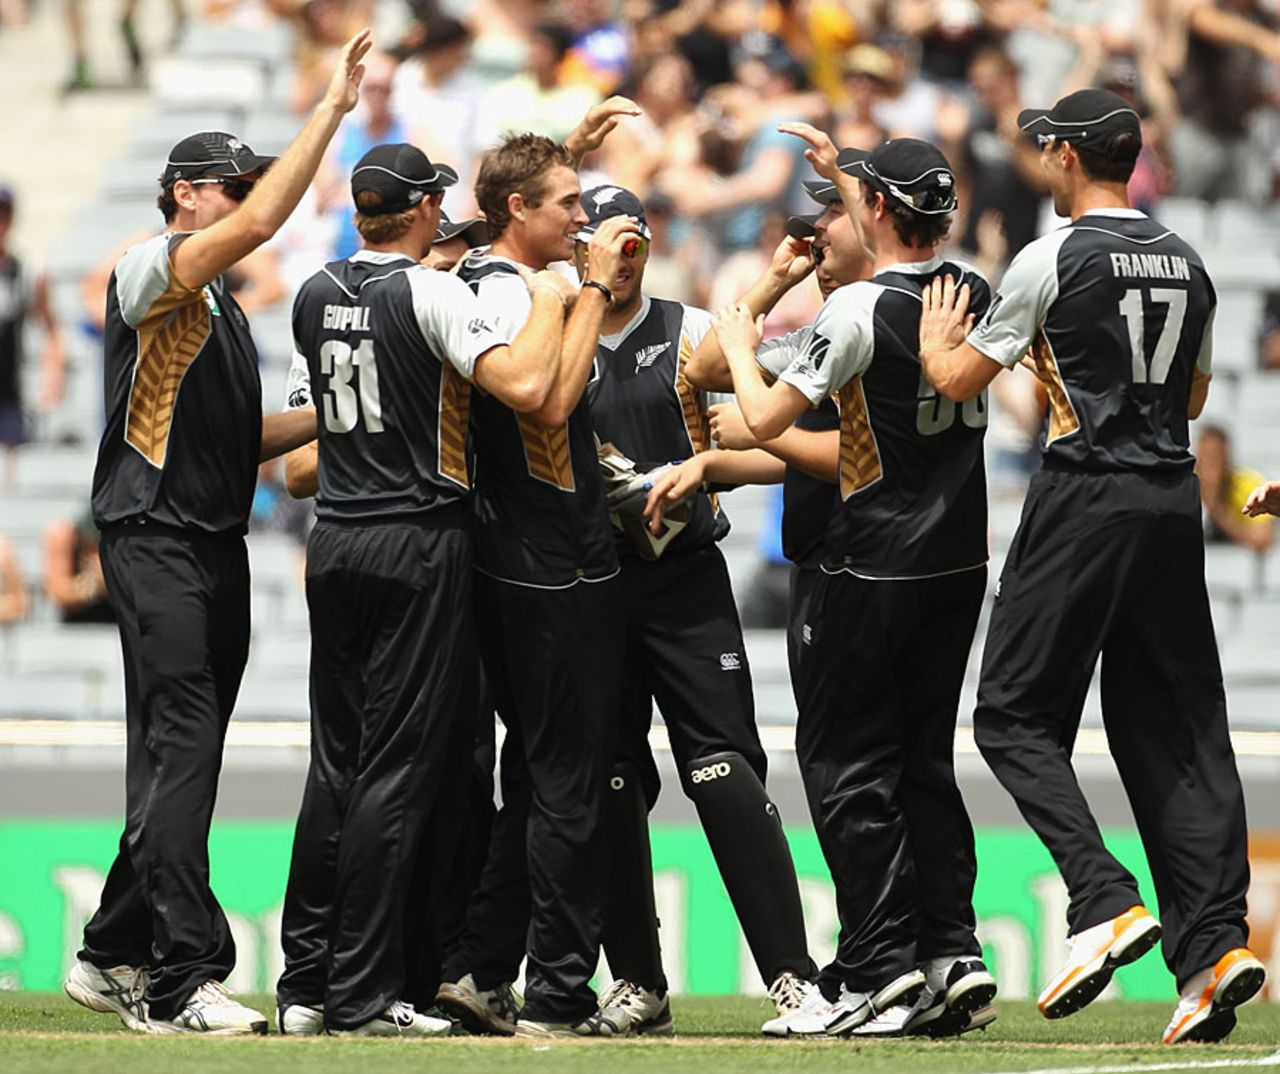 New Zealand had much to celebrate about, New Zealand v Pakistan, 1st Twenty20, Auckland, December 26, 2010